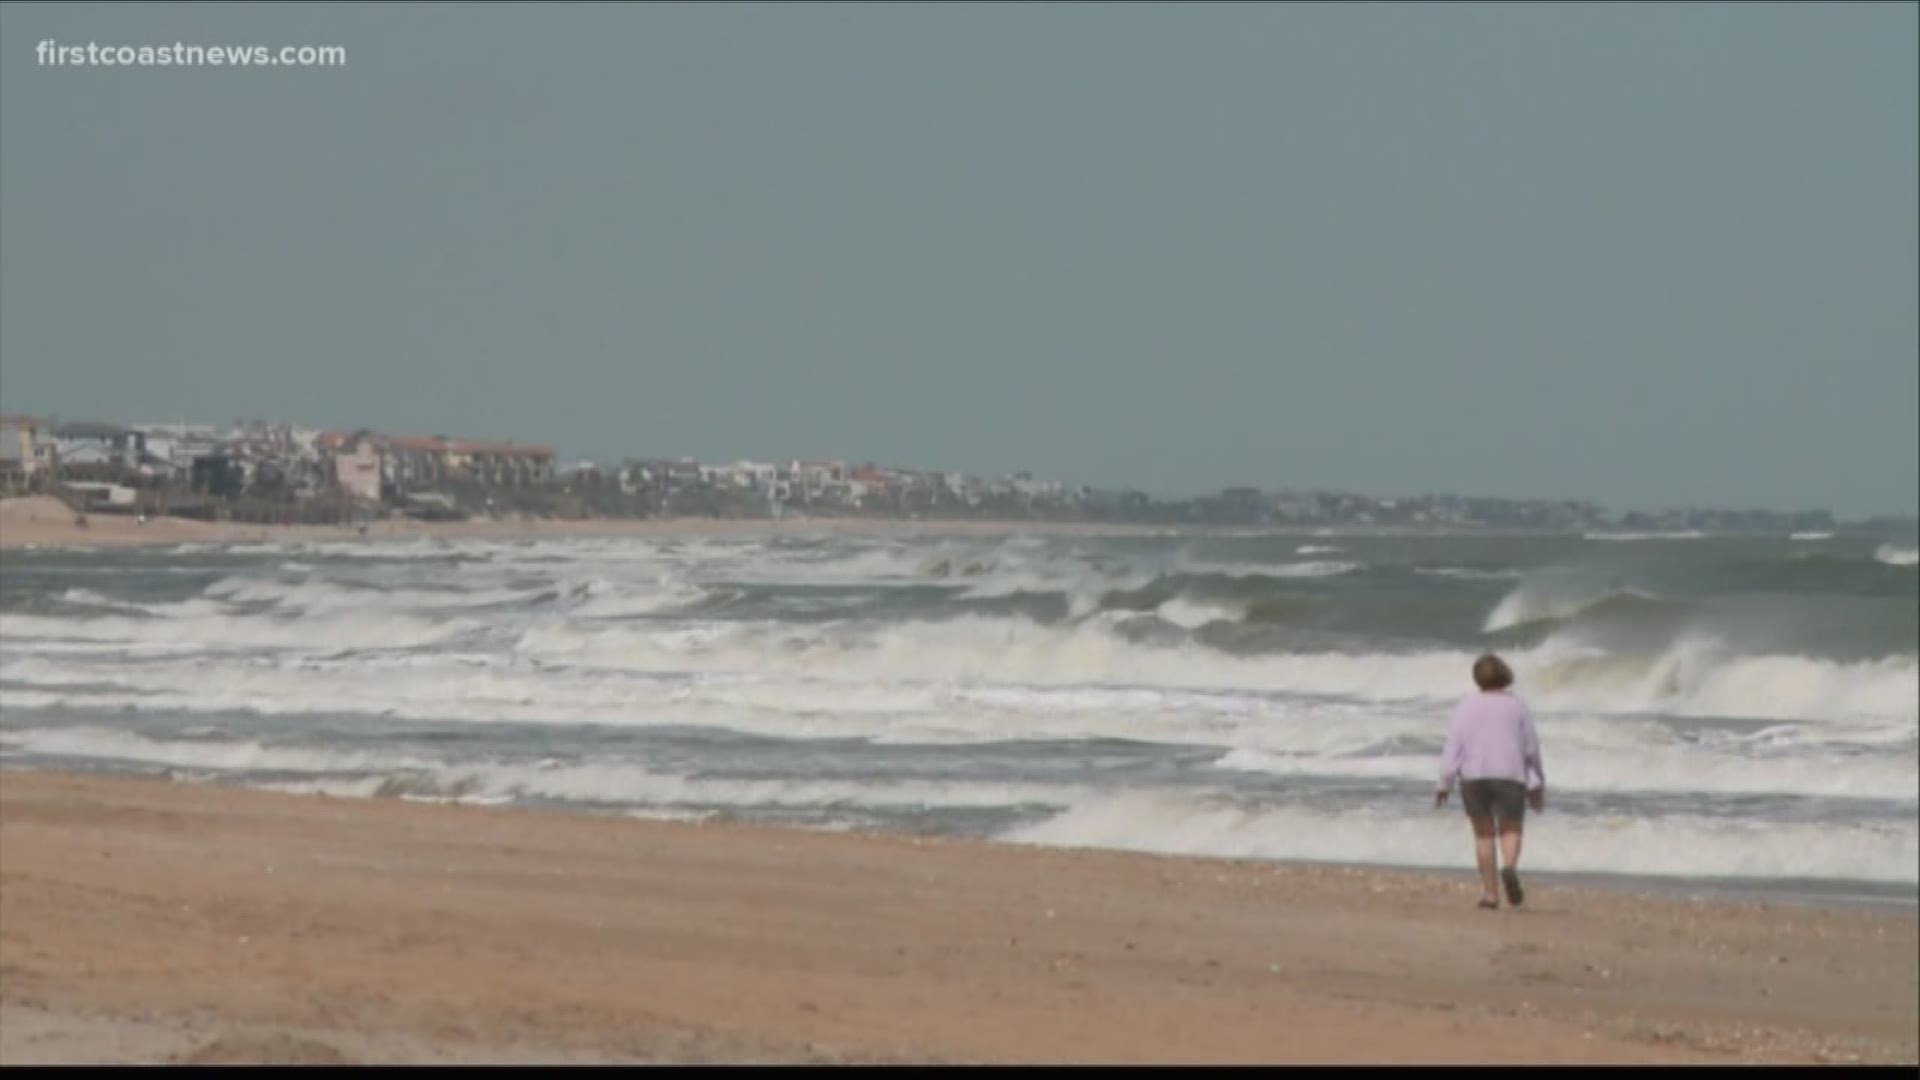 Officials say the goal is to prevent nearby homes from hurricanes and storm surge.